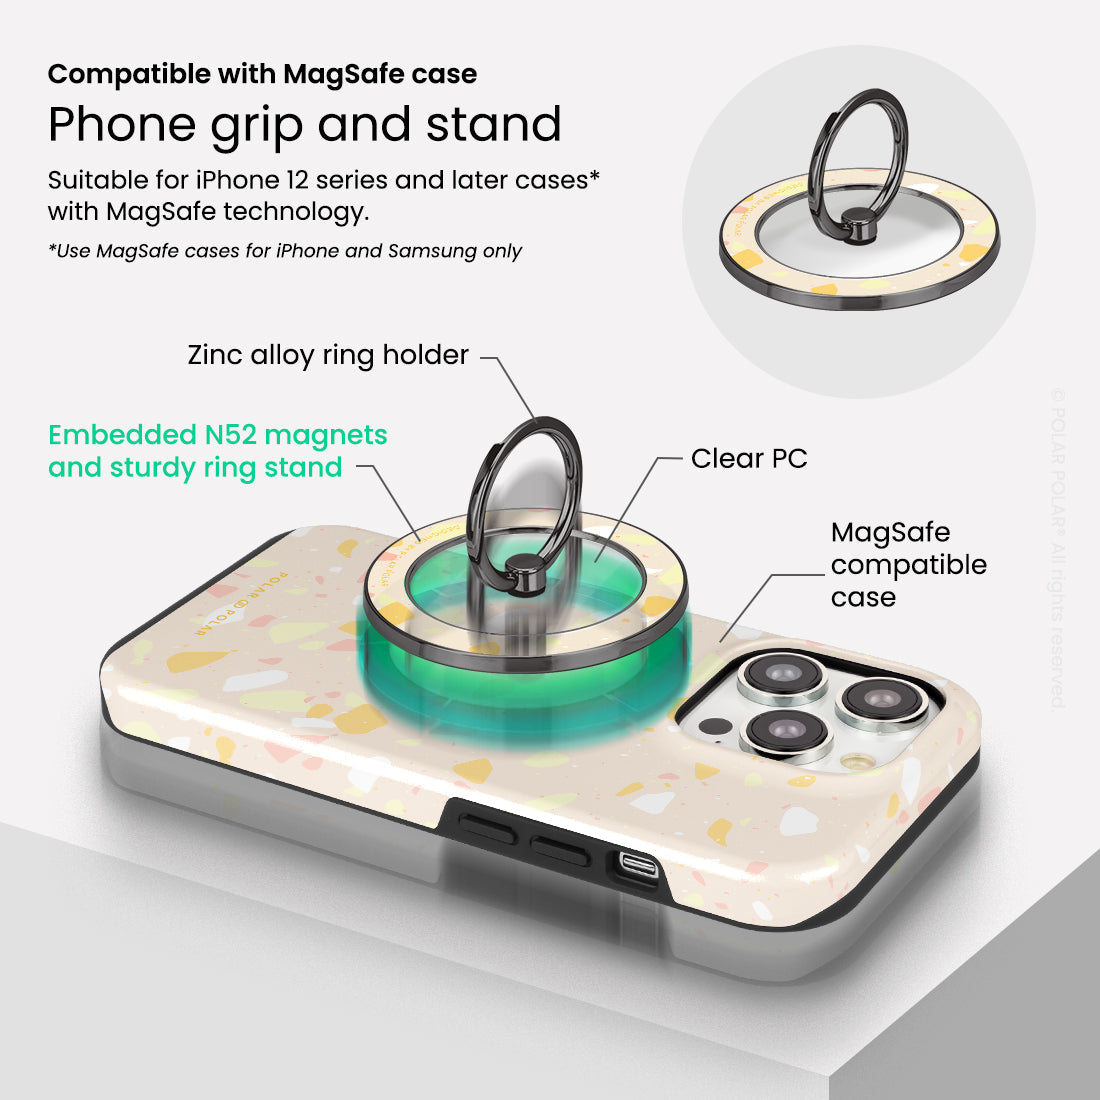 Standard_MagSafe Phone Grip and Ring Holder